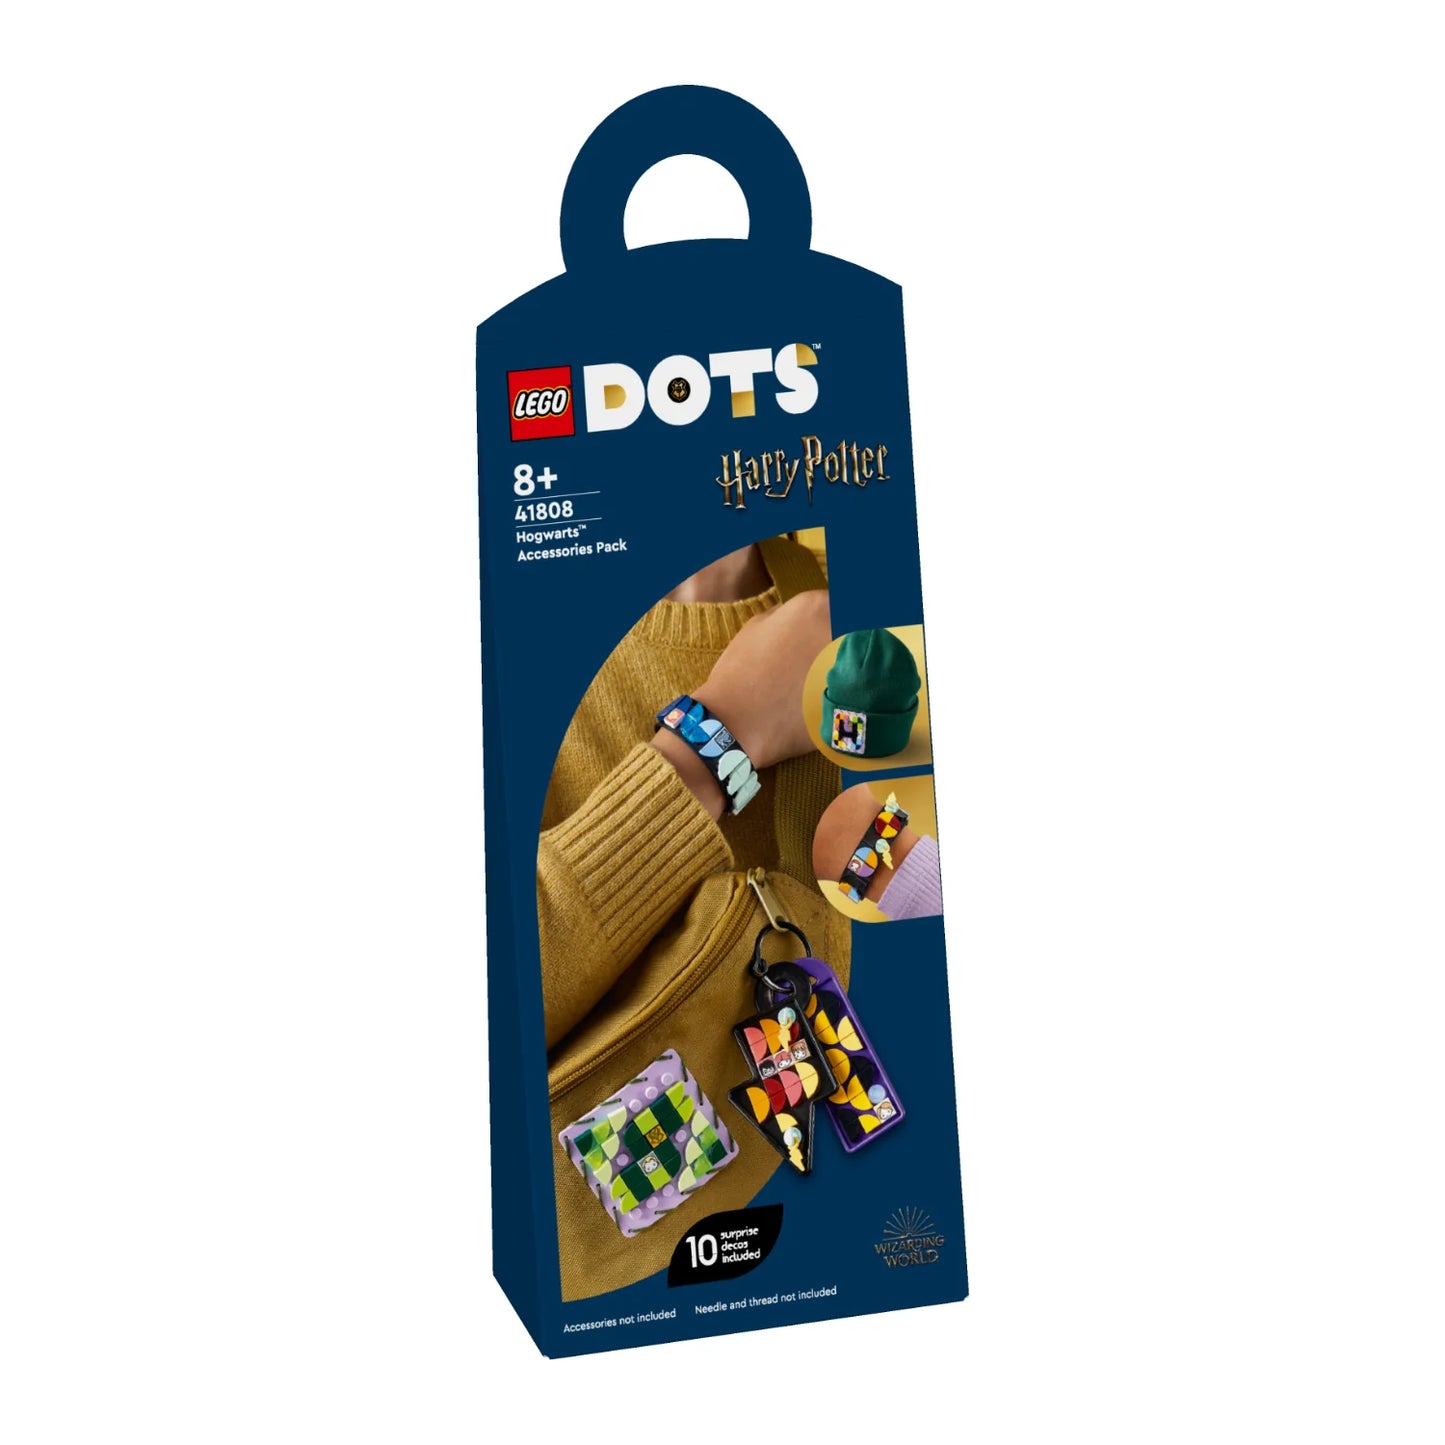 Lego Harry Potter DOTS™ Hogwarts™ Accessories Pack 41808